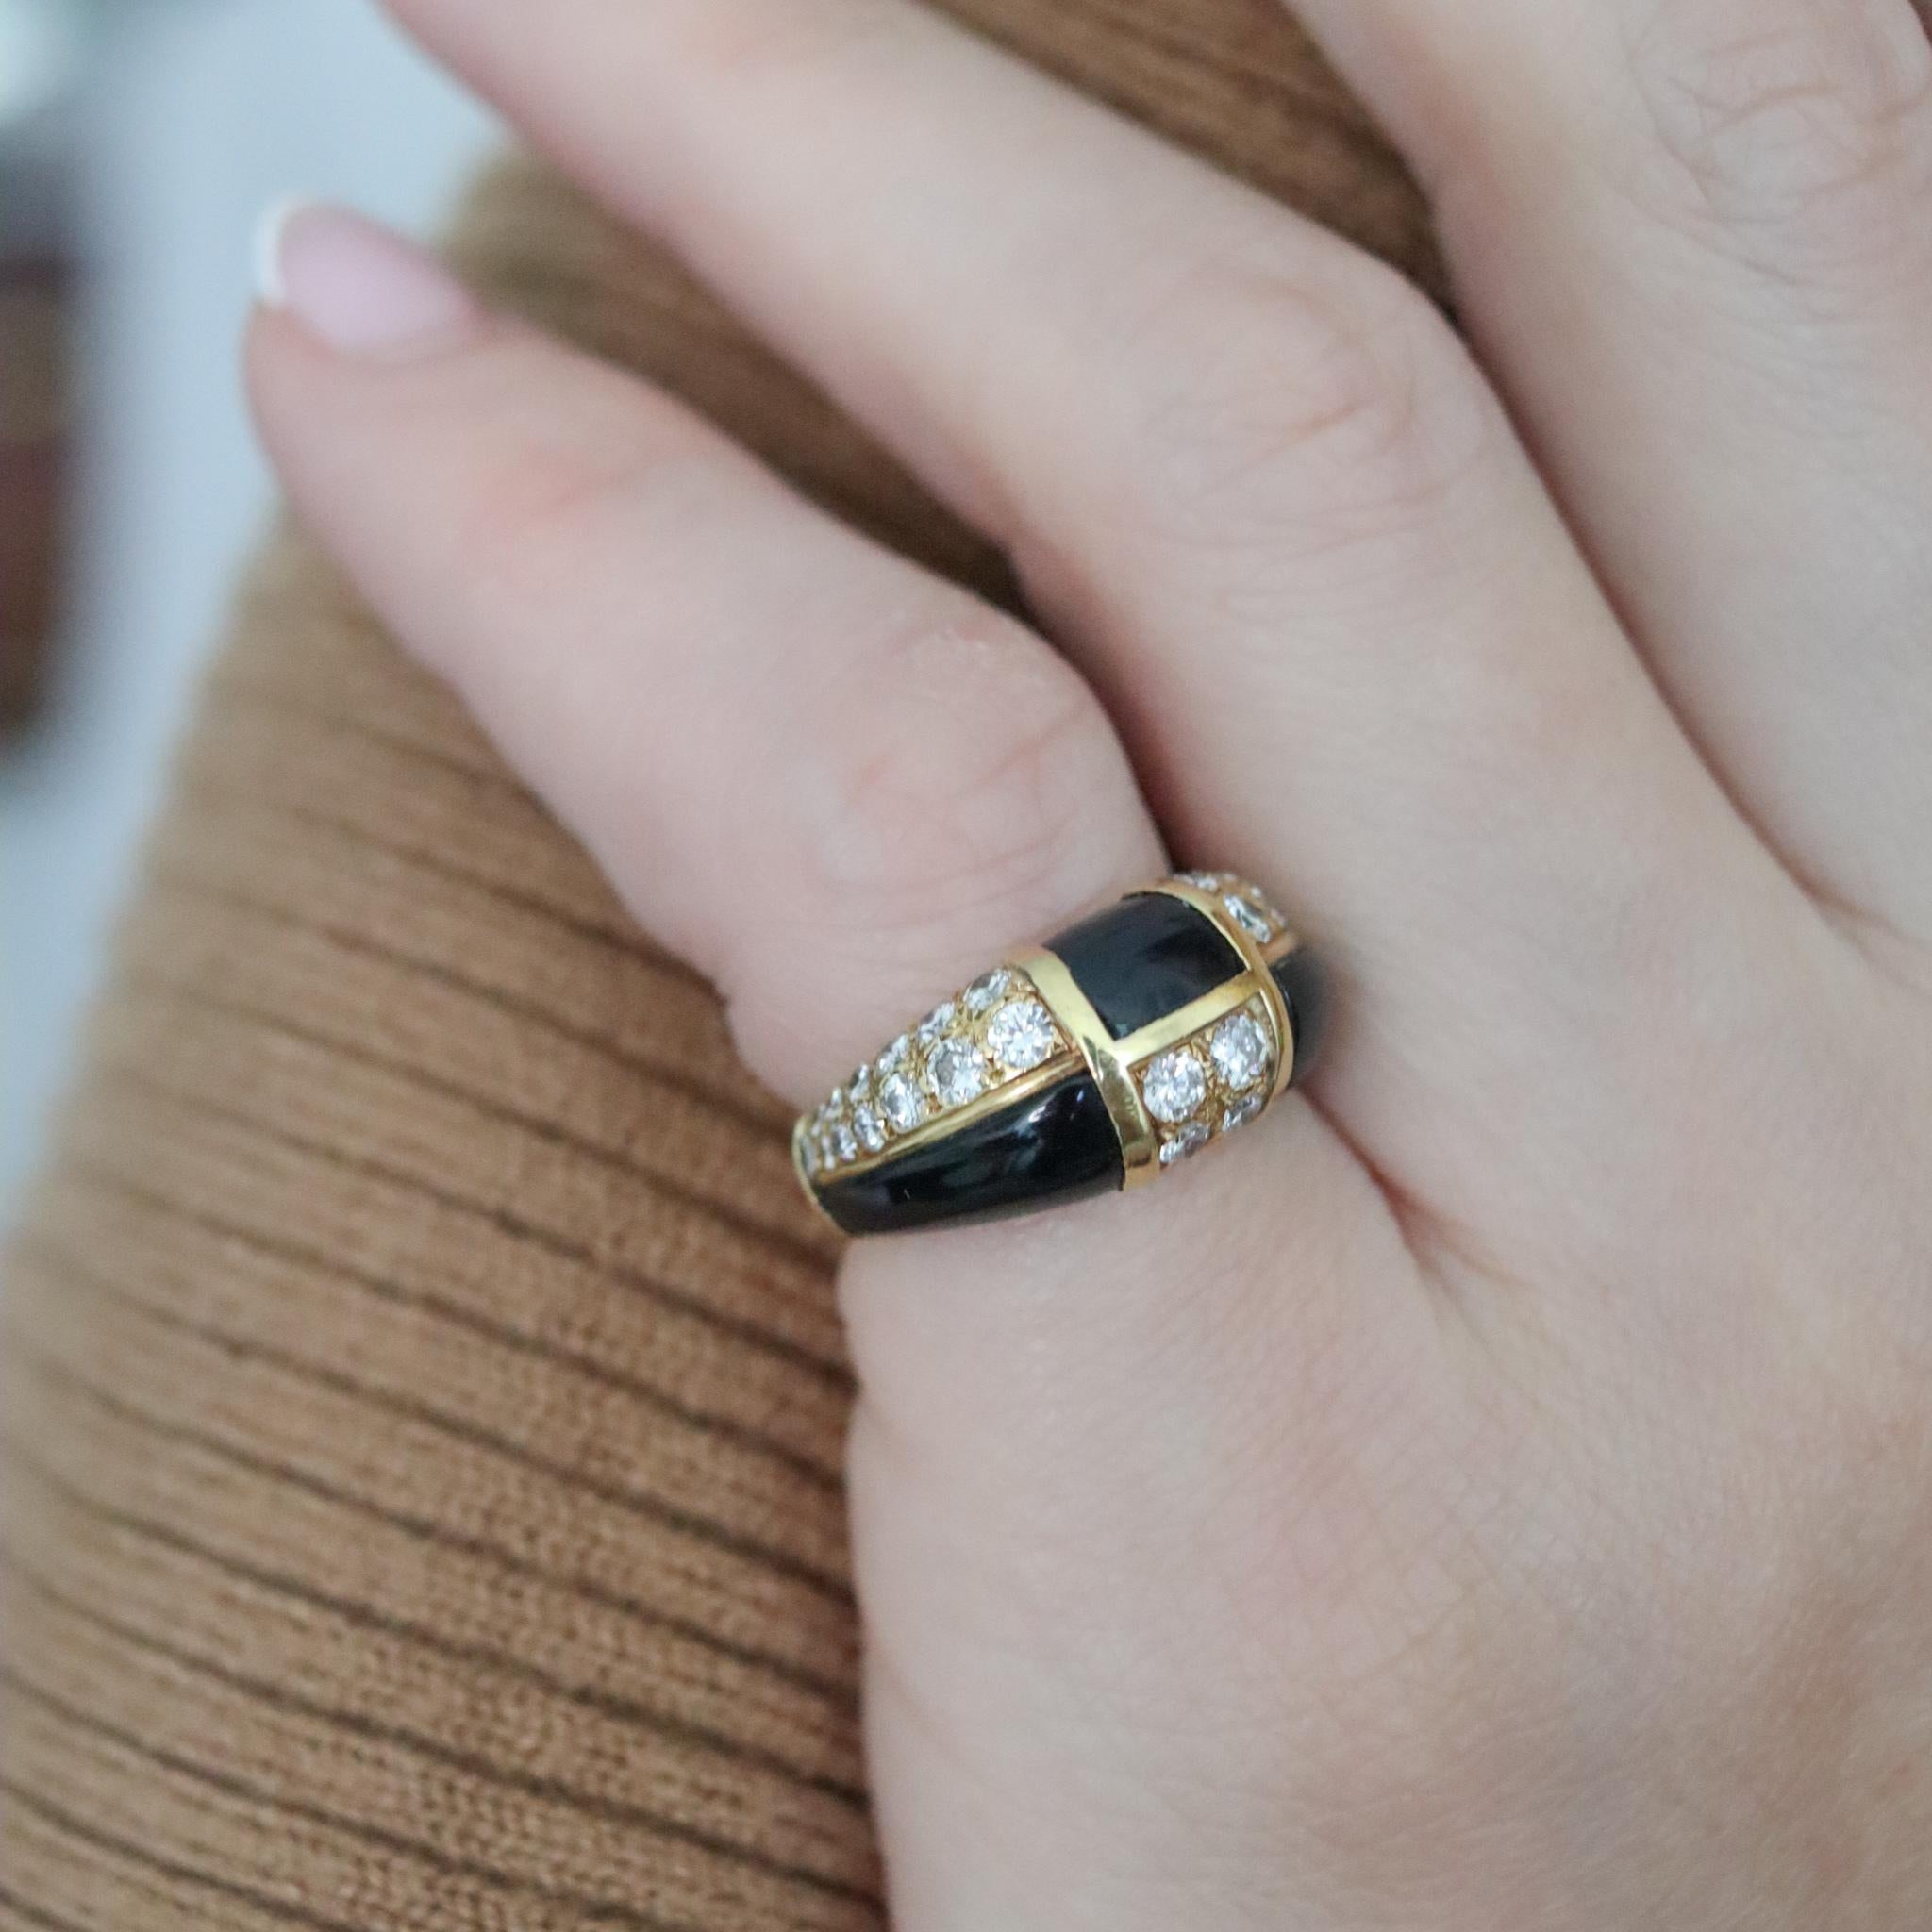 Van Cleef & Arpels 1973 Geometric Onyx Ring 18kt Gold with 1.45ctw in Diamonds In Excellent Condition For Sale In Miami, FL